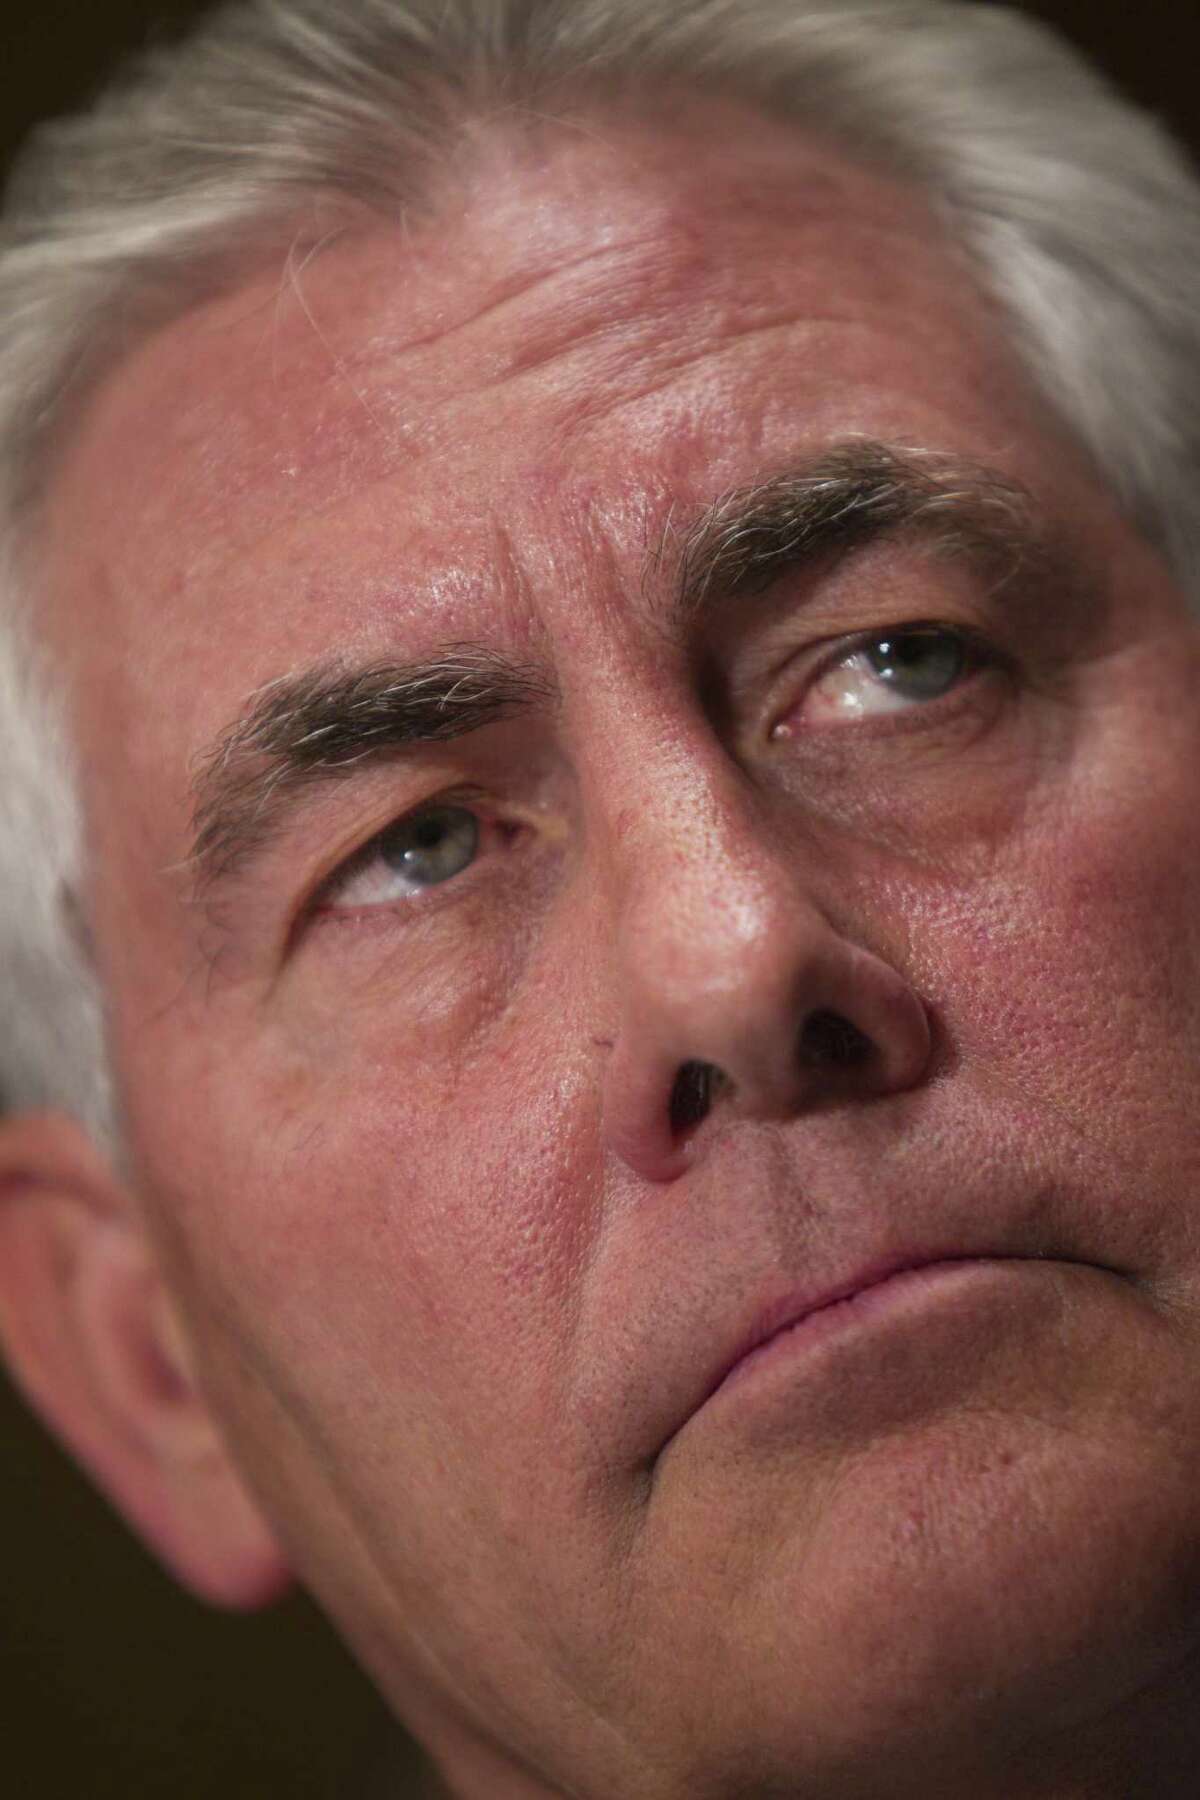 Rex Tillerson, chief executive of Exxon Mobil, testifies before a Senate Finance Committee hearing on oil company subsidies on Capitol Hill in Washington, on May 12, 2011. President-elect Donald Trump on Dec. 13, 2016, officially selected Tillerson to be his secretary of state. In saying he will nominate Tillerson, Trump is dismissing bipartisan concerns that the globe-trotting leader of an energy giant has a too-cozy relationship with Russian President Vladimir Putin. (Stephen Crowley/The New York Times)